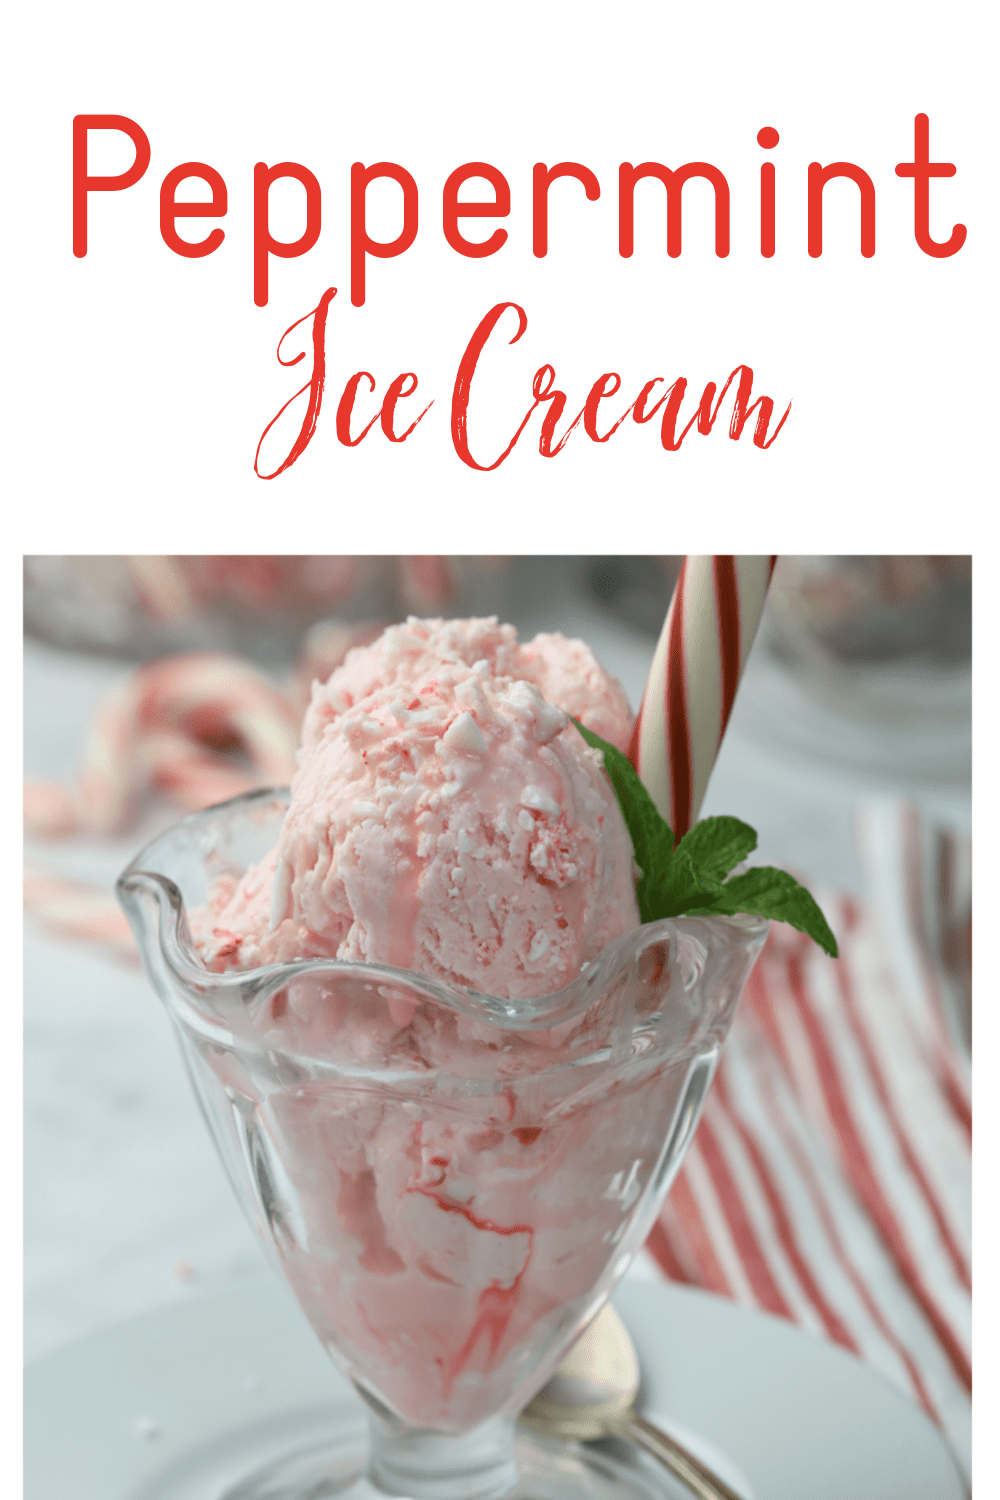 This super easy peppermint ice cream using sweetened condensed milk and crushed peppermint candies is perfect for the holidays.